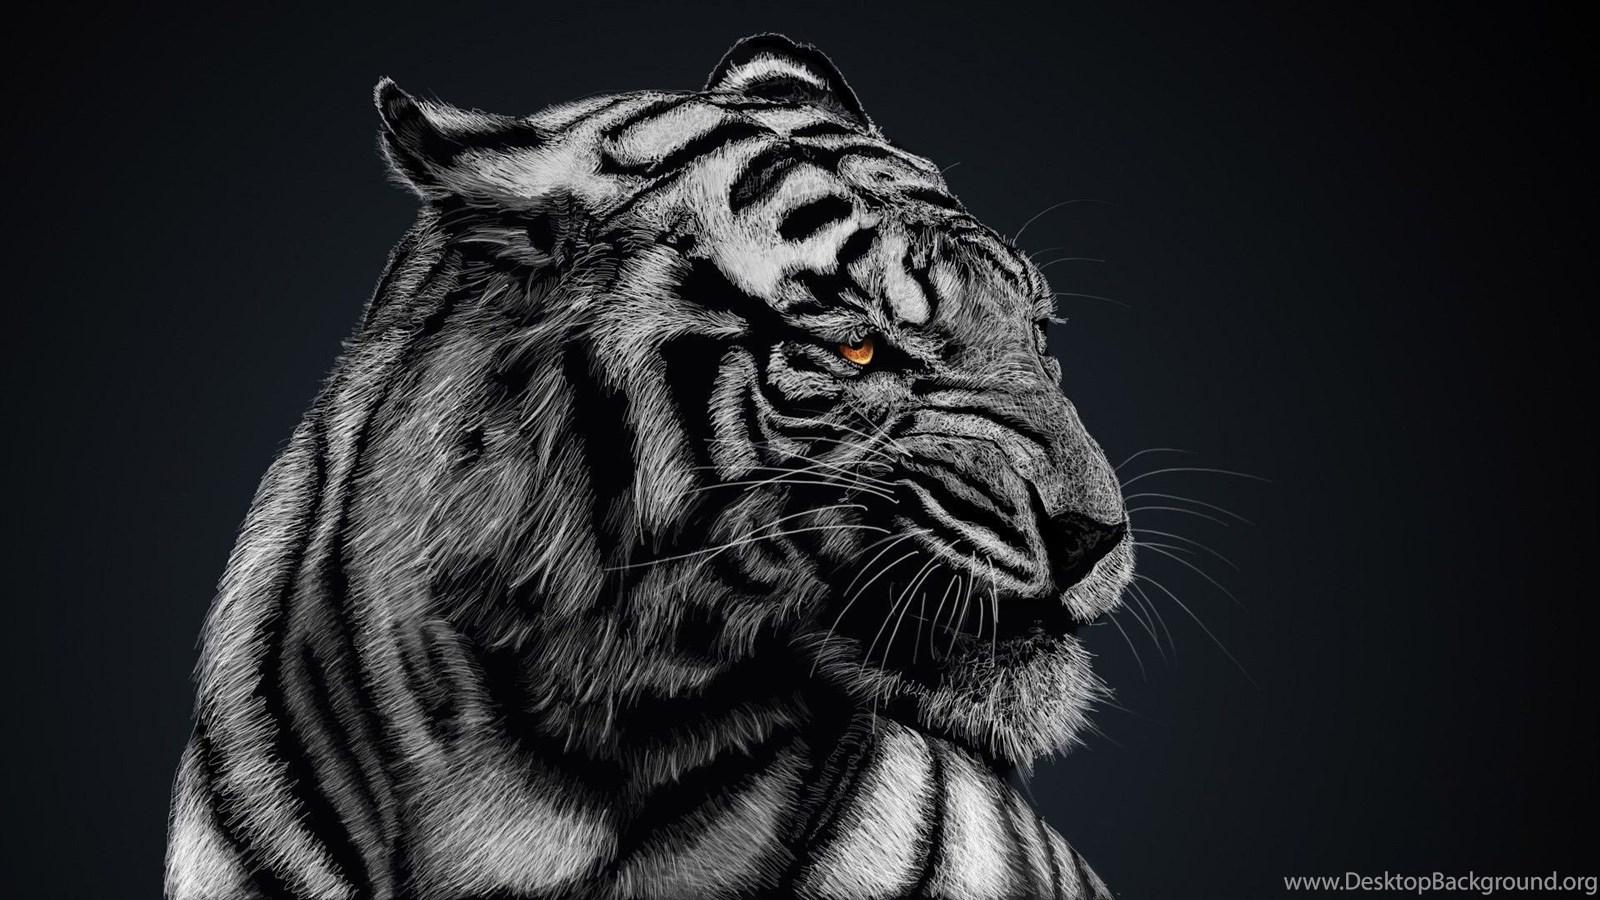 Black And White Tiger Wallpaper High Quality, Animal